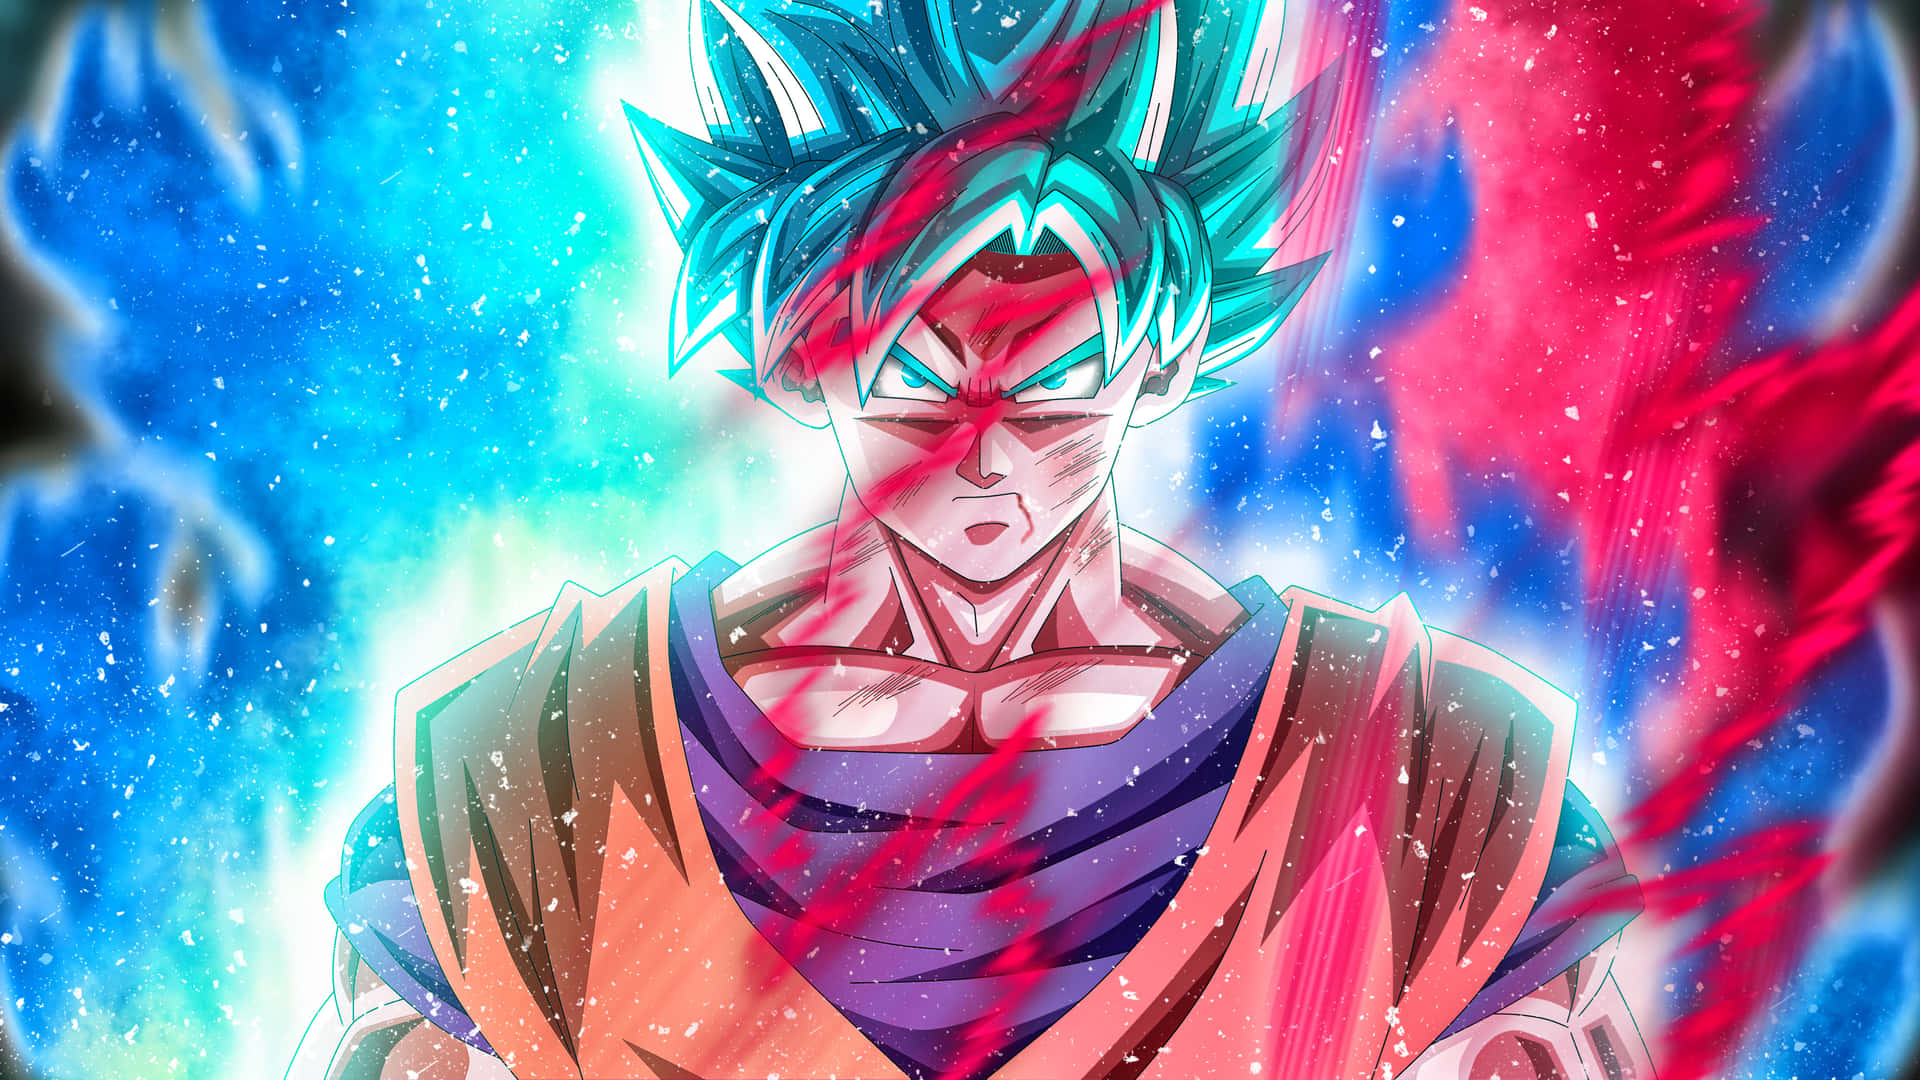 Goku from the hit anime series Dragon Ball, ready for battle Wallpaper